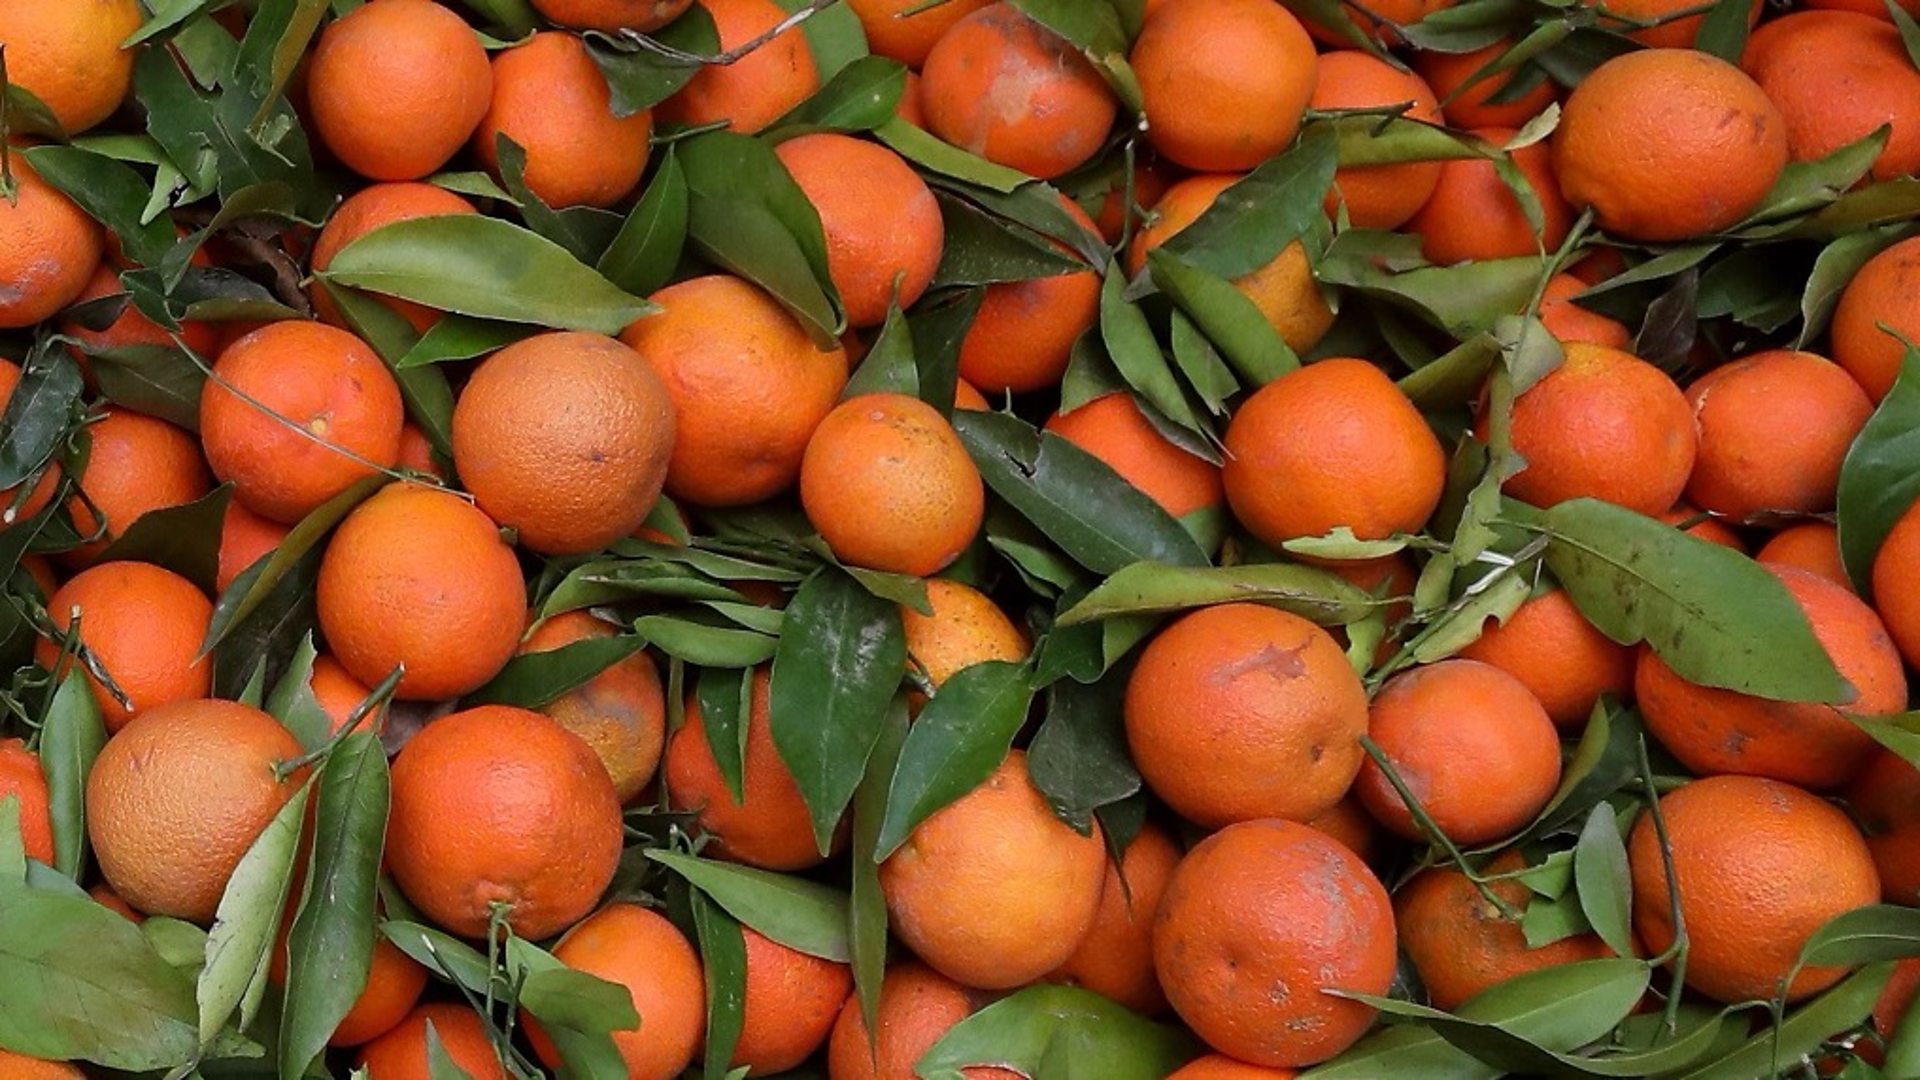 Difference Between Orange and Clementine